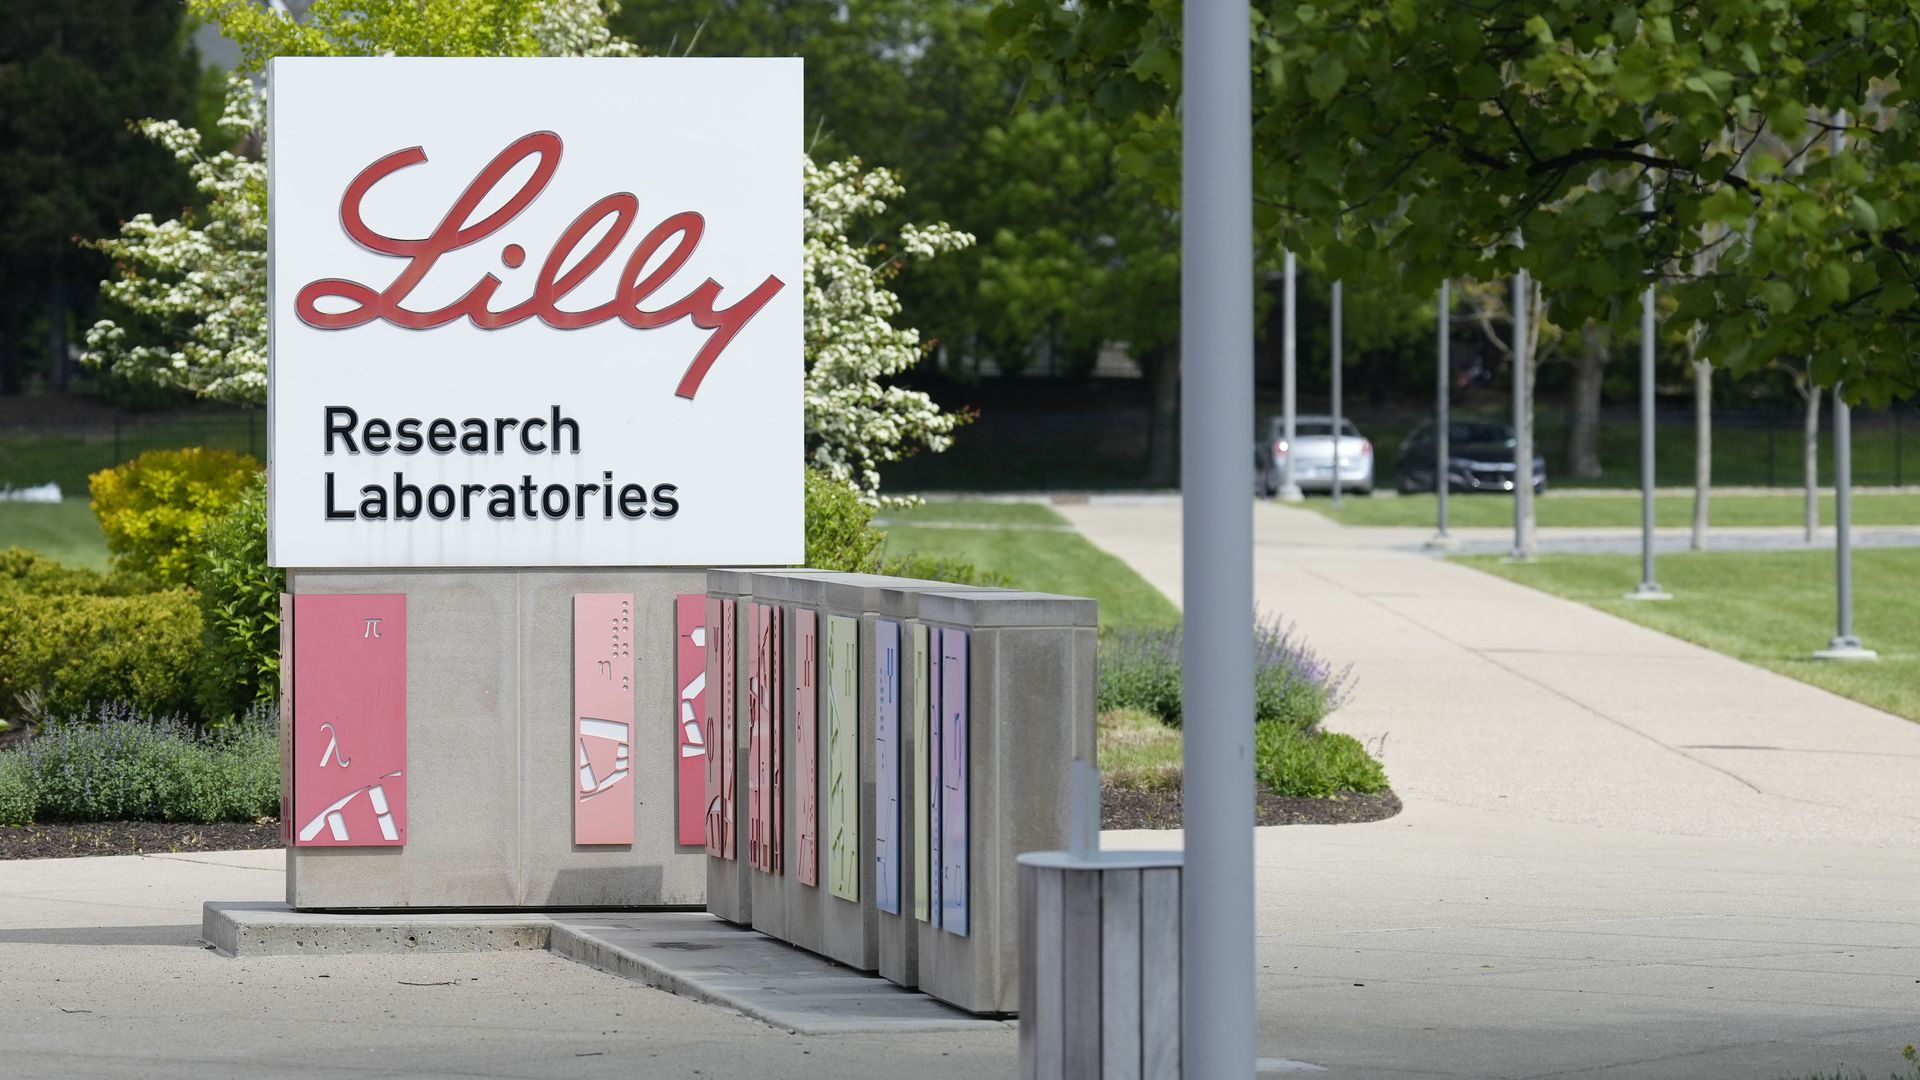 An Eli Lilly sign says "Lilly Research Laboratories" in downtown Indianapolis.